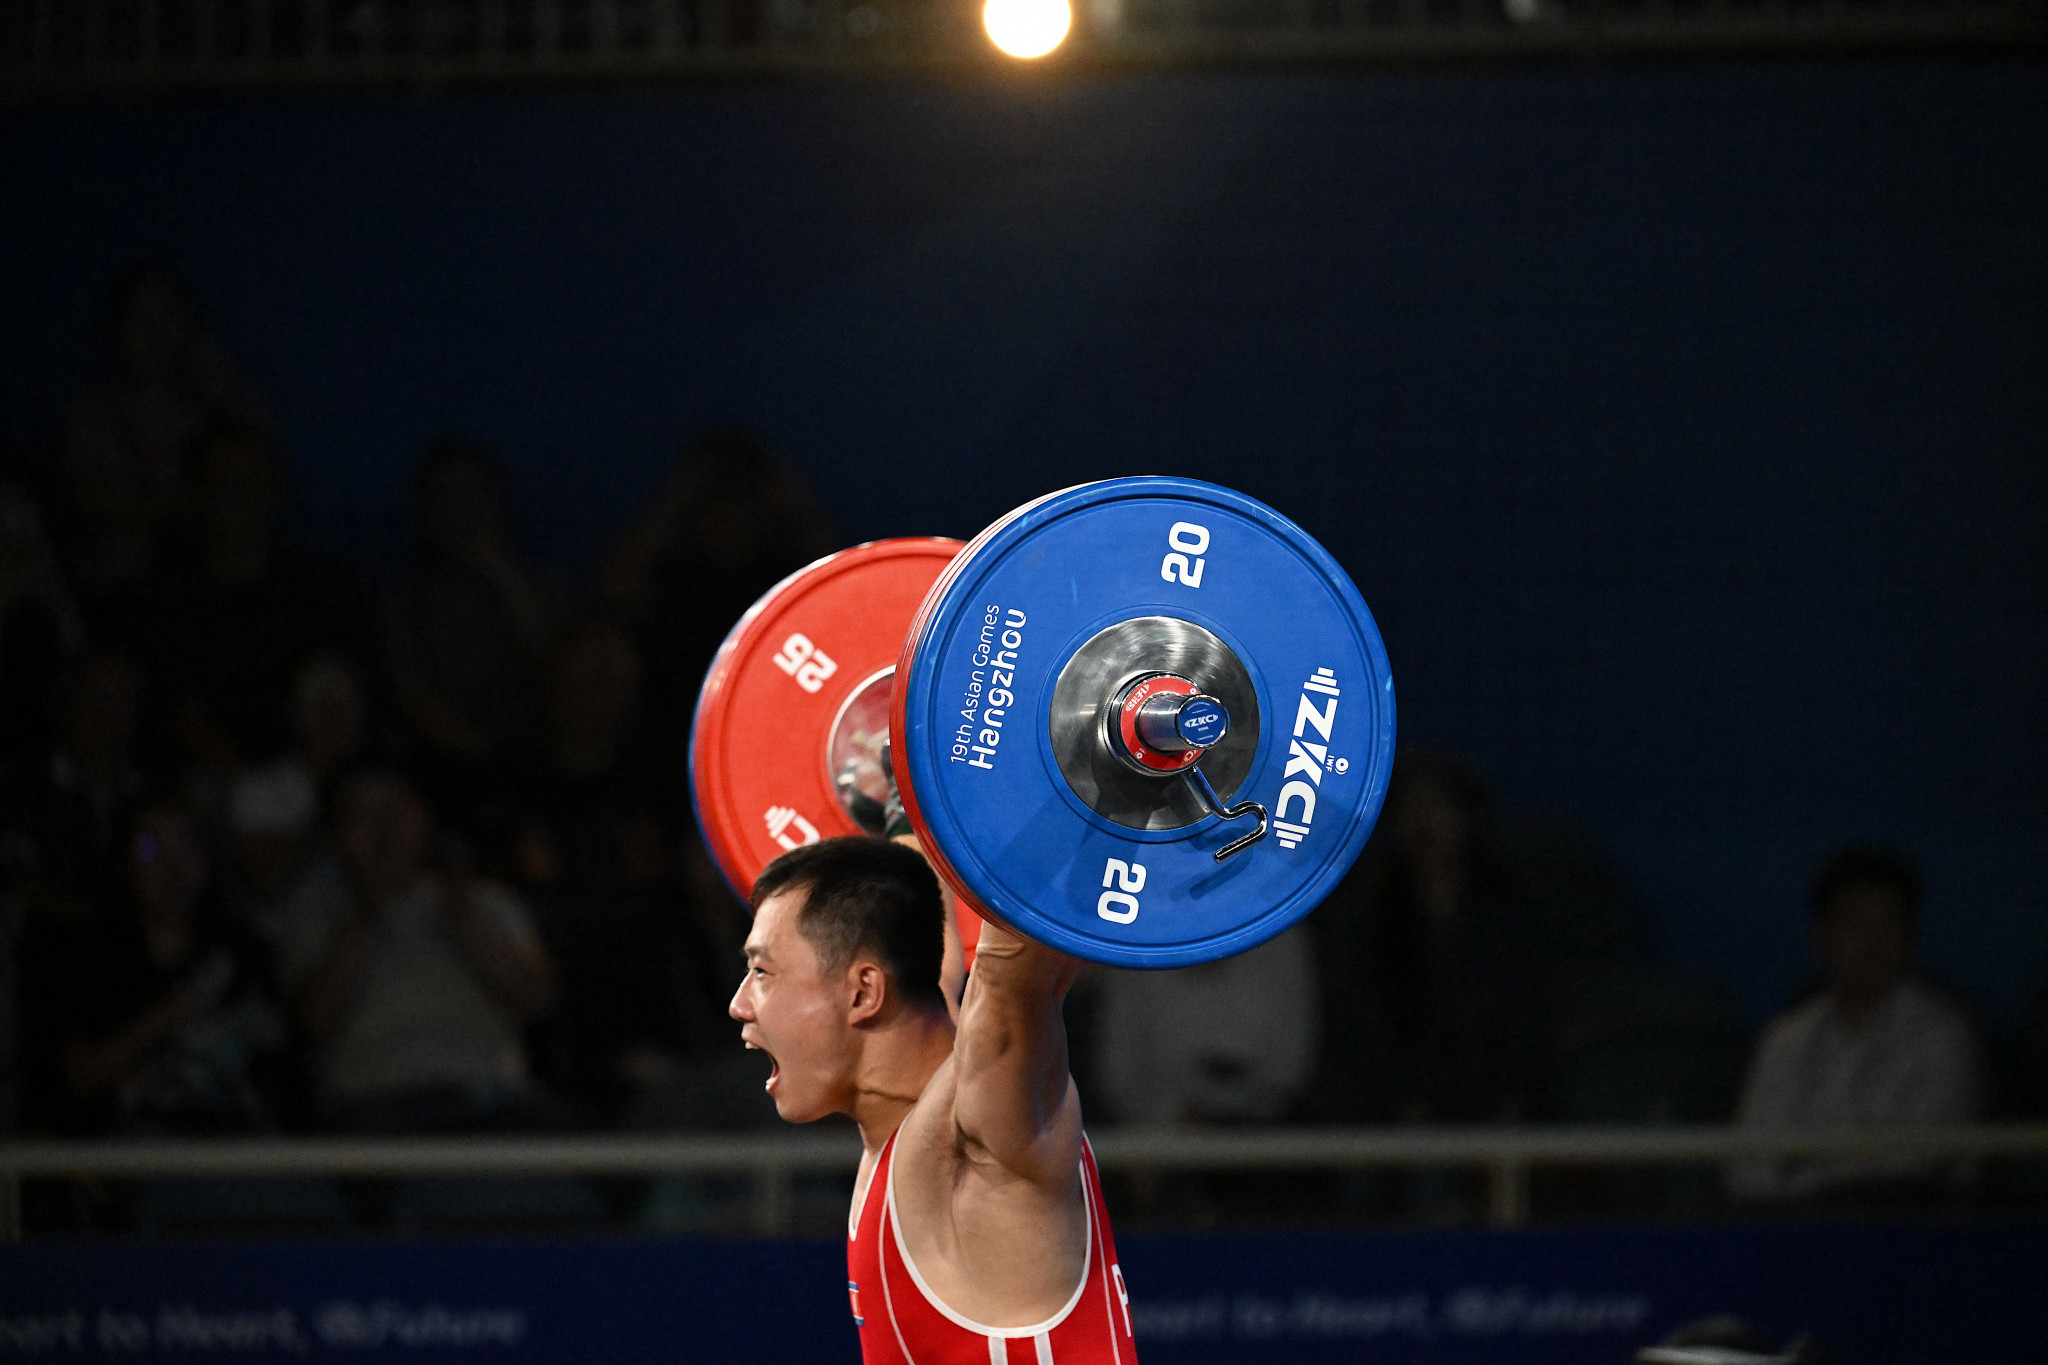 North Korean winner twice fails to take Erwin’s weightlifting world record at Asian Games